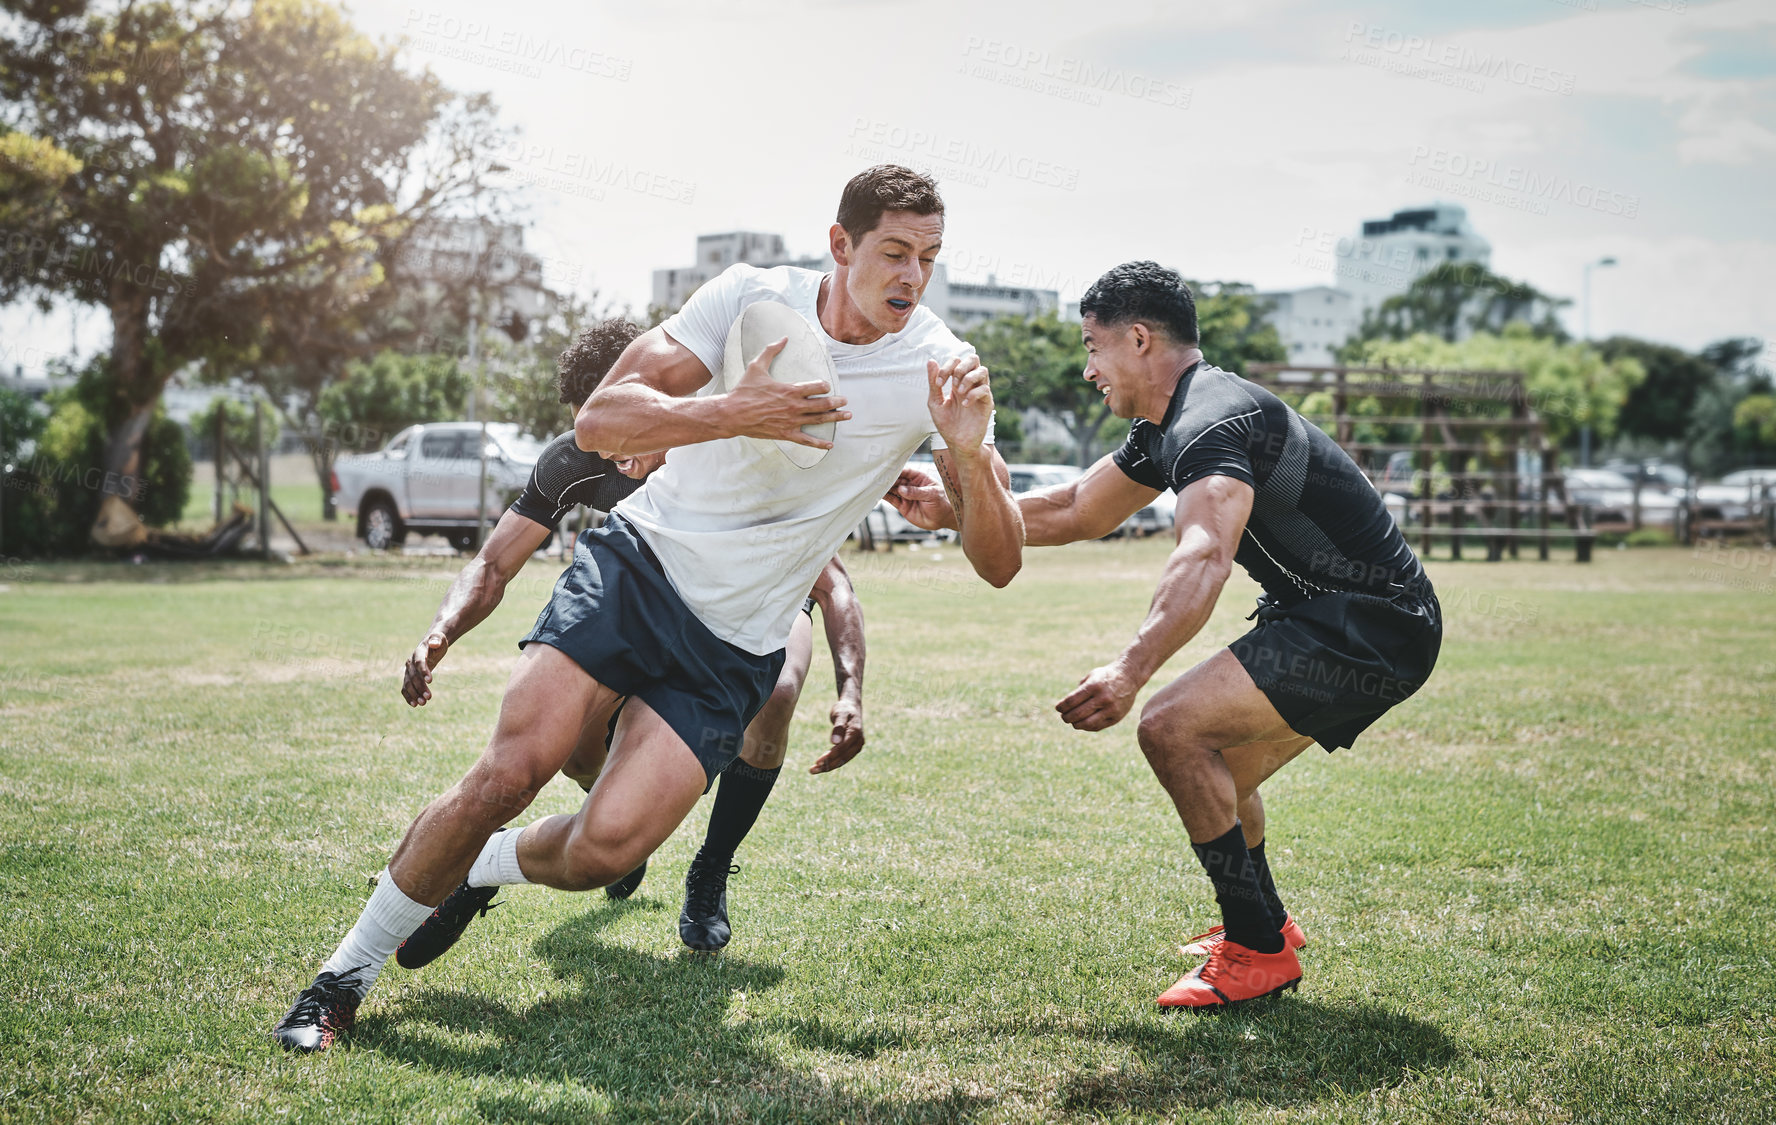 Buy stock photo Shot of a focused young rugby player competing against his opponents during a match outside on a filed